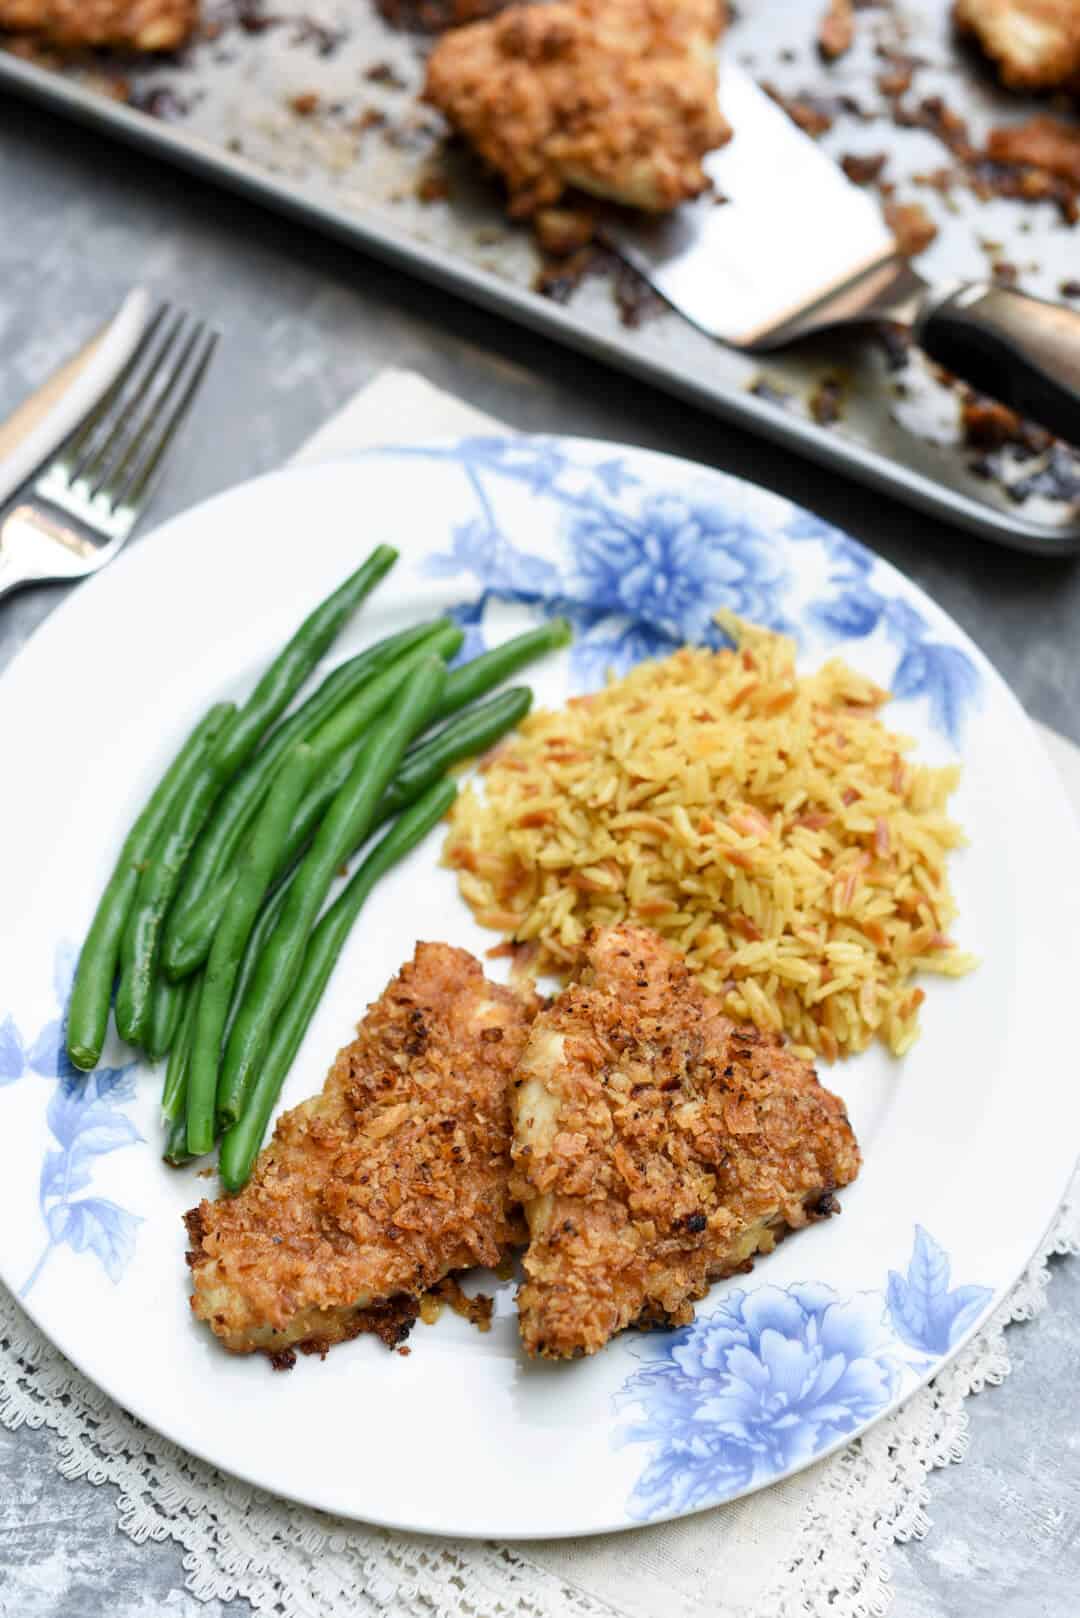 Crispy breaded chicken on a plate with green beans and rice.